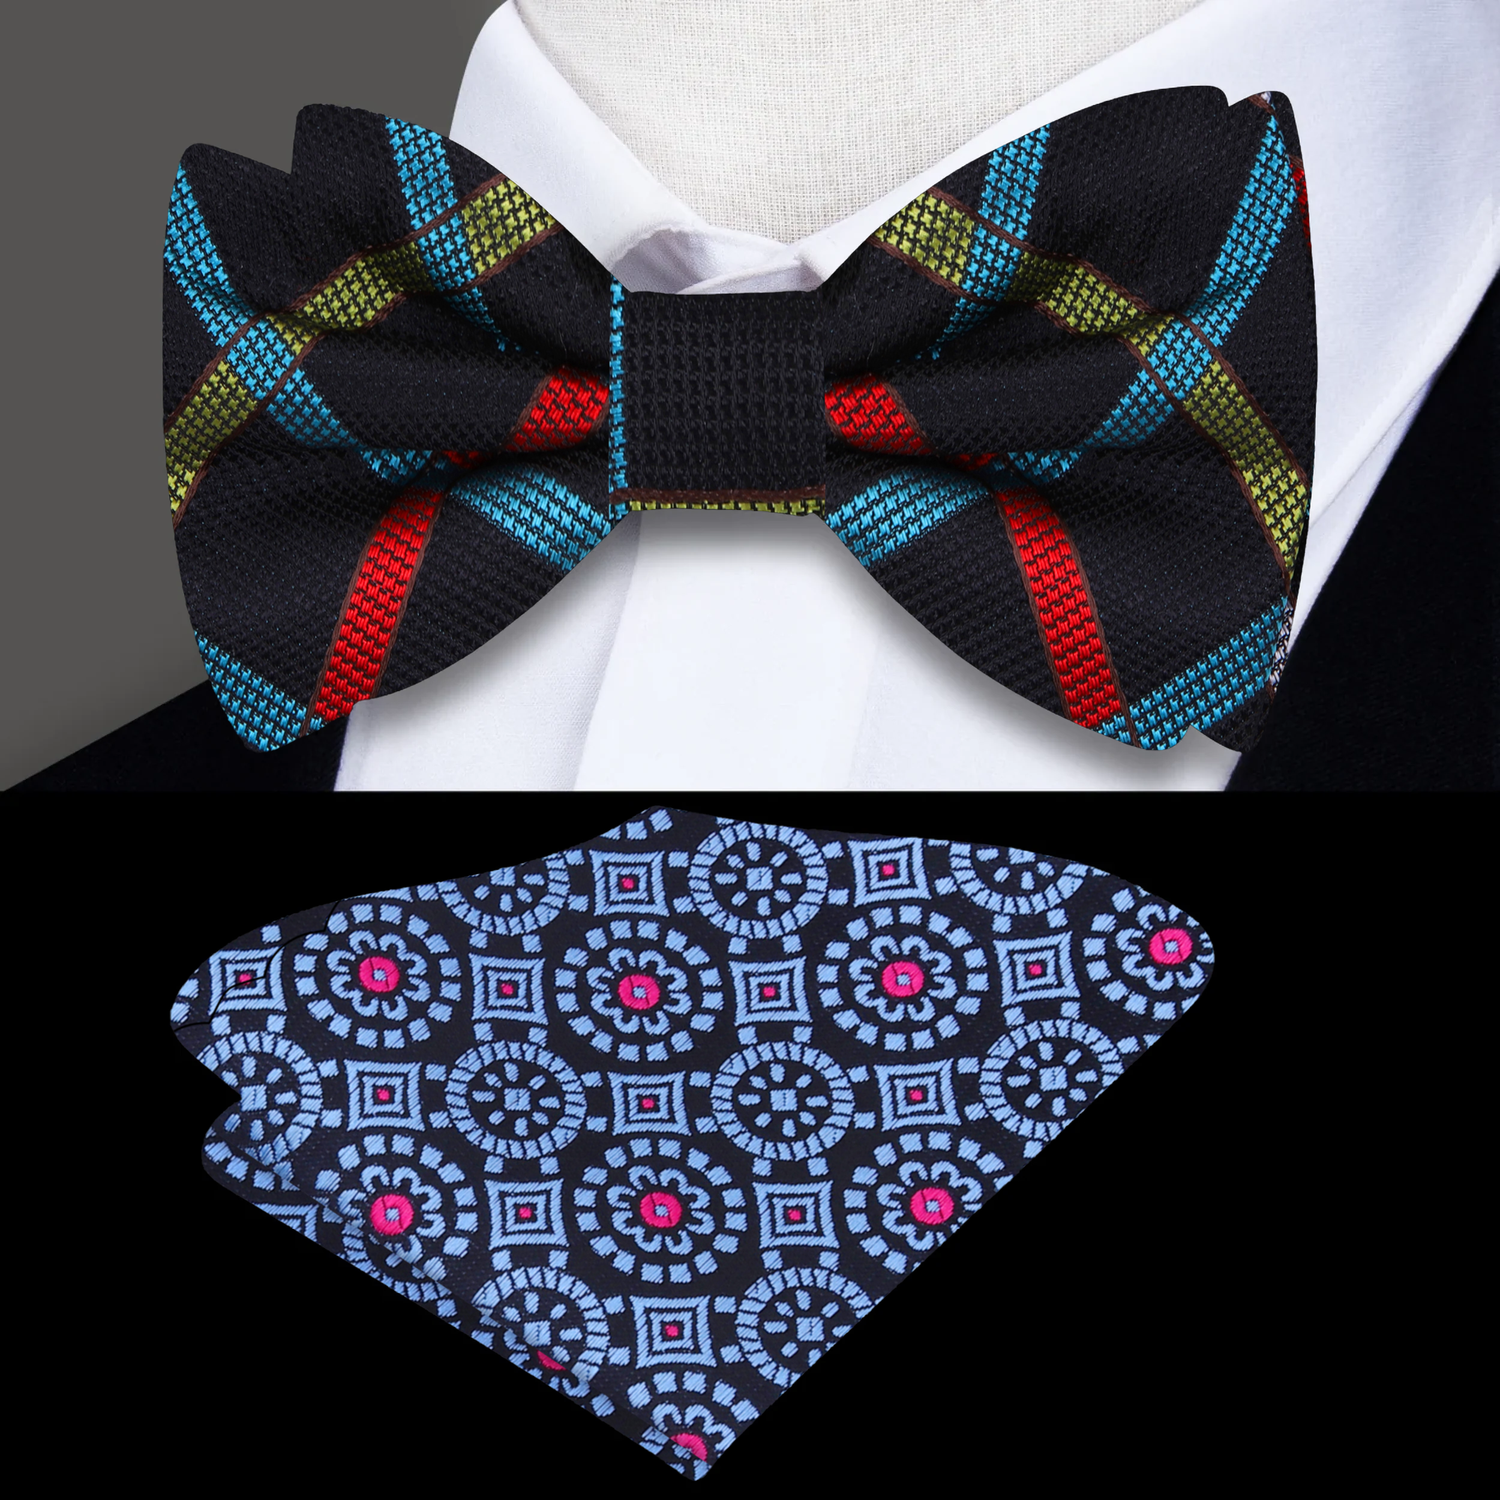 Black, Red, Yellow and Grey Plaid Bow Tie and Accenting Pocket Square